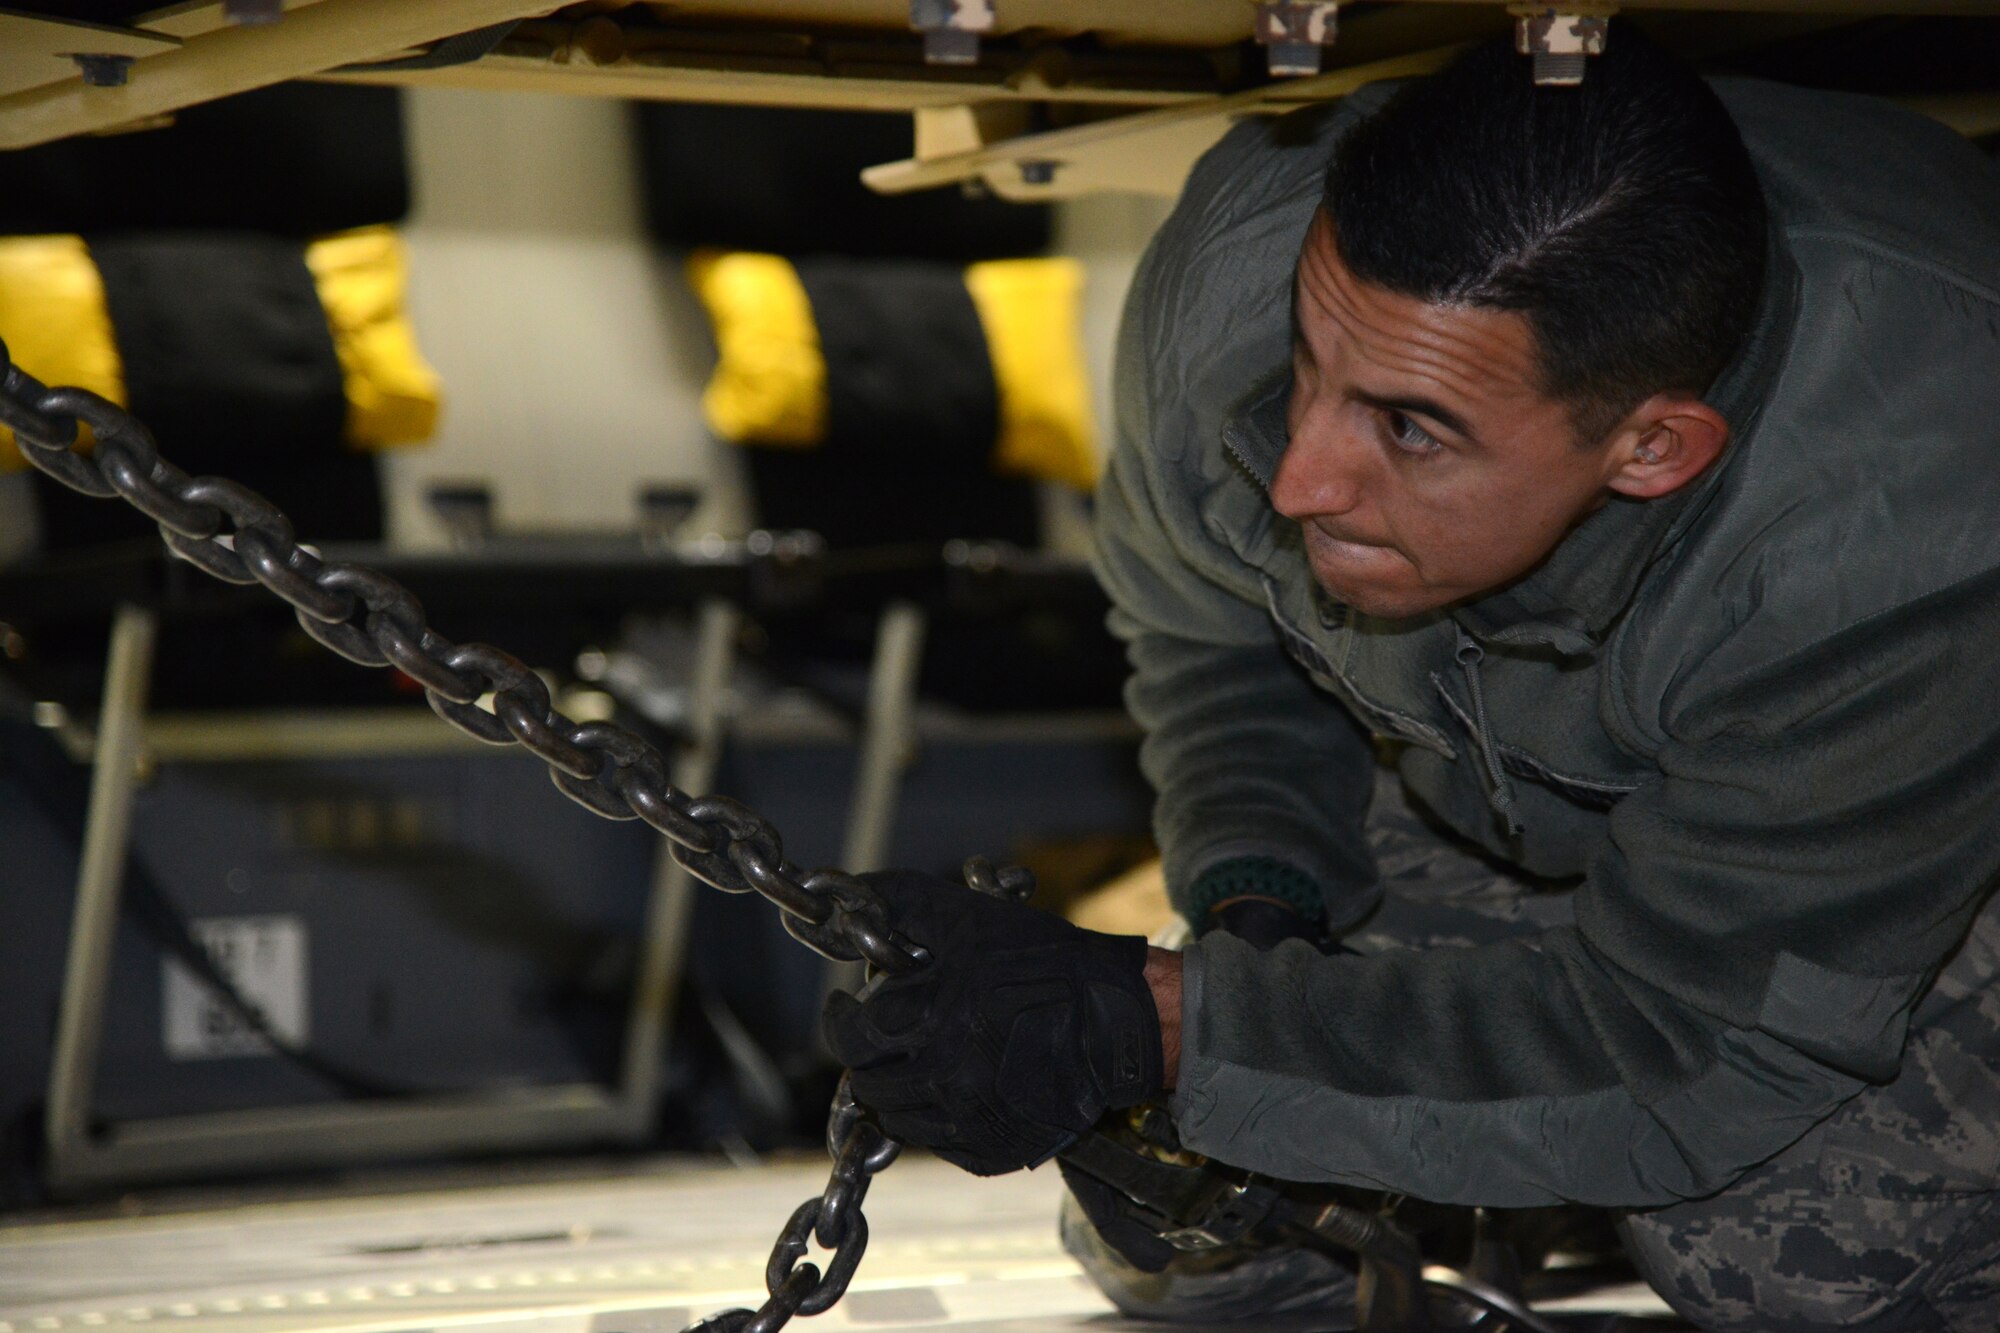 Staff Sgt. Omar Morales, 386th Expeditionary Logistics Readiness Squadron, secures the chains on one of two Mine Resistant Armored Personnel carriers on a C-17 Globemaster III bound for Erbil, Iraq, Dec. 30, 2014. The MRAPs are for the Iraqi Security Forces and Peshmerga to aid in the fight against Daish. (U.S. Air Force photo by Tech. Sgt. Jared Marquis/released)